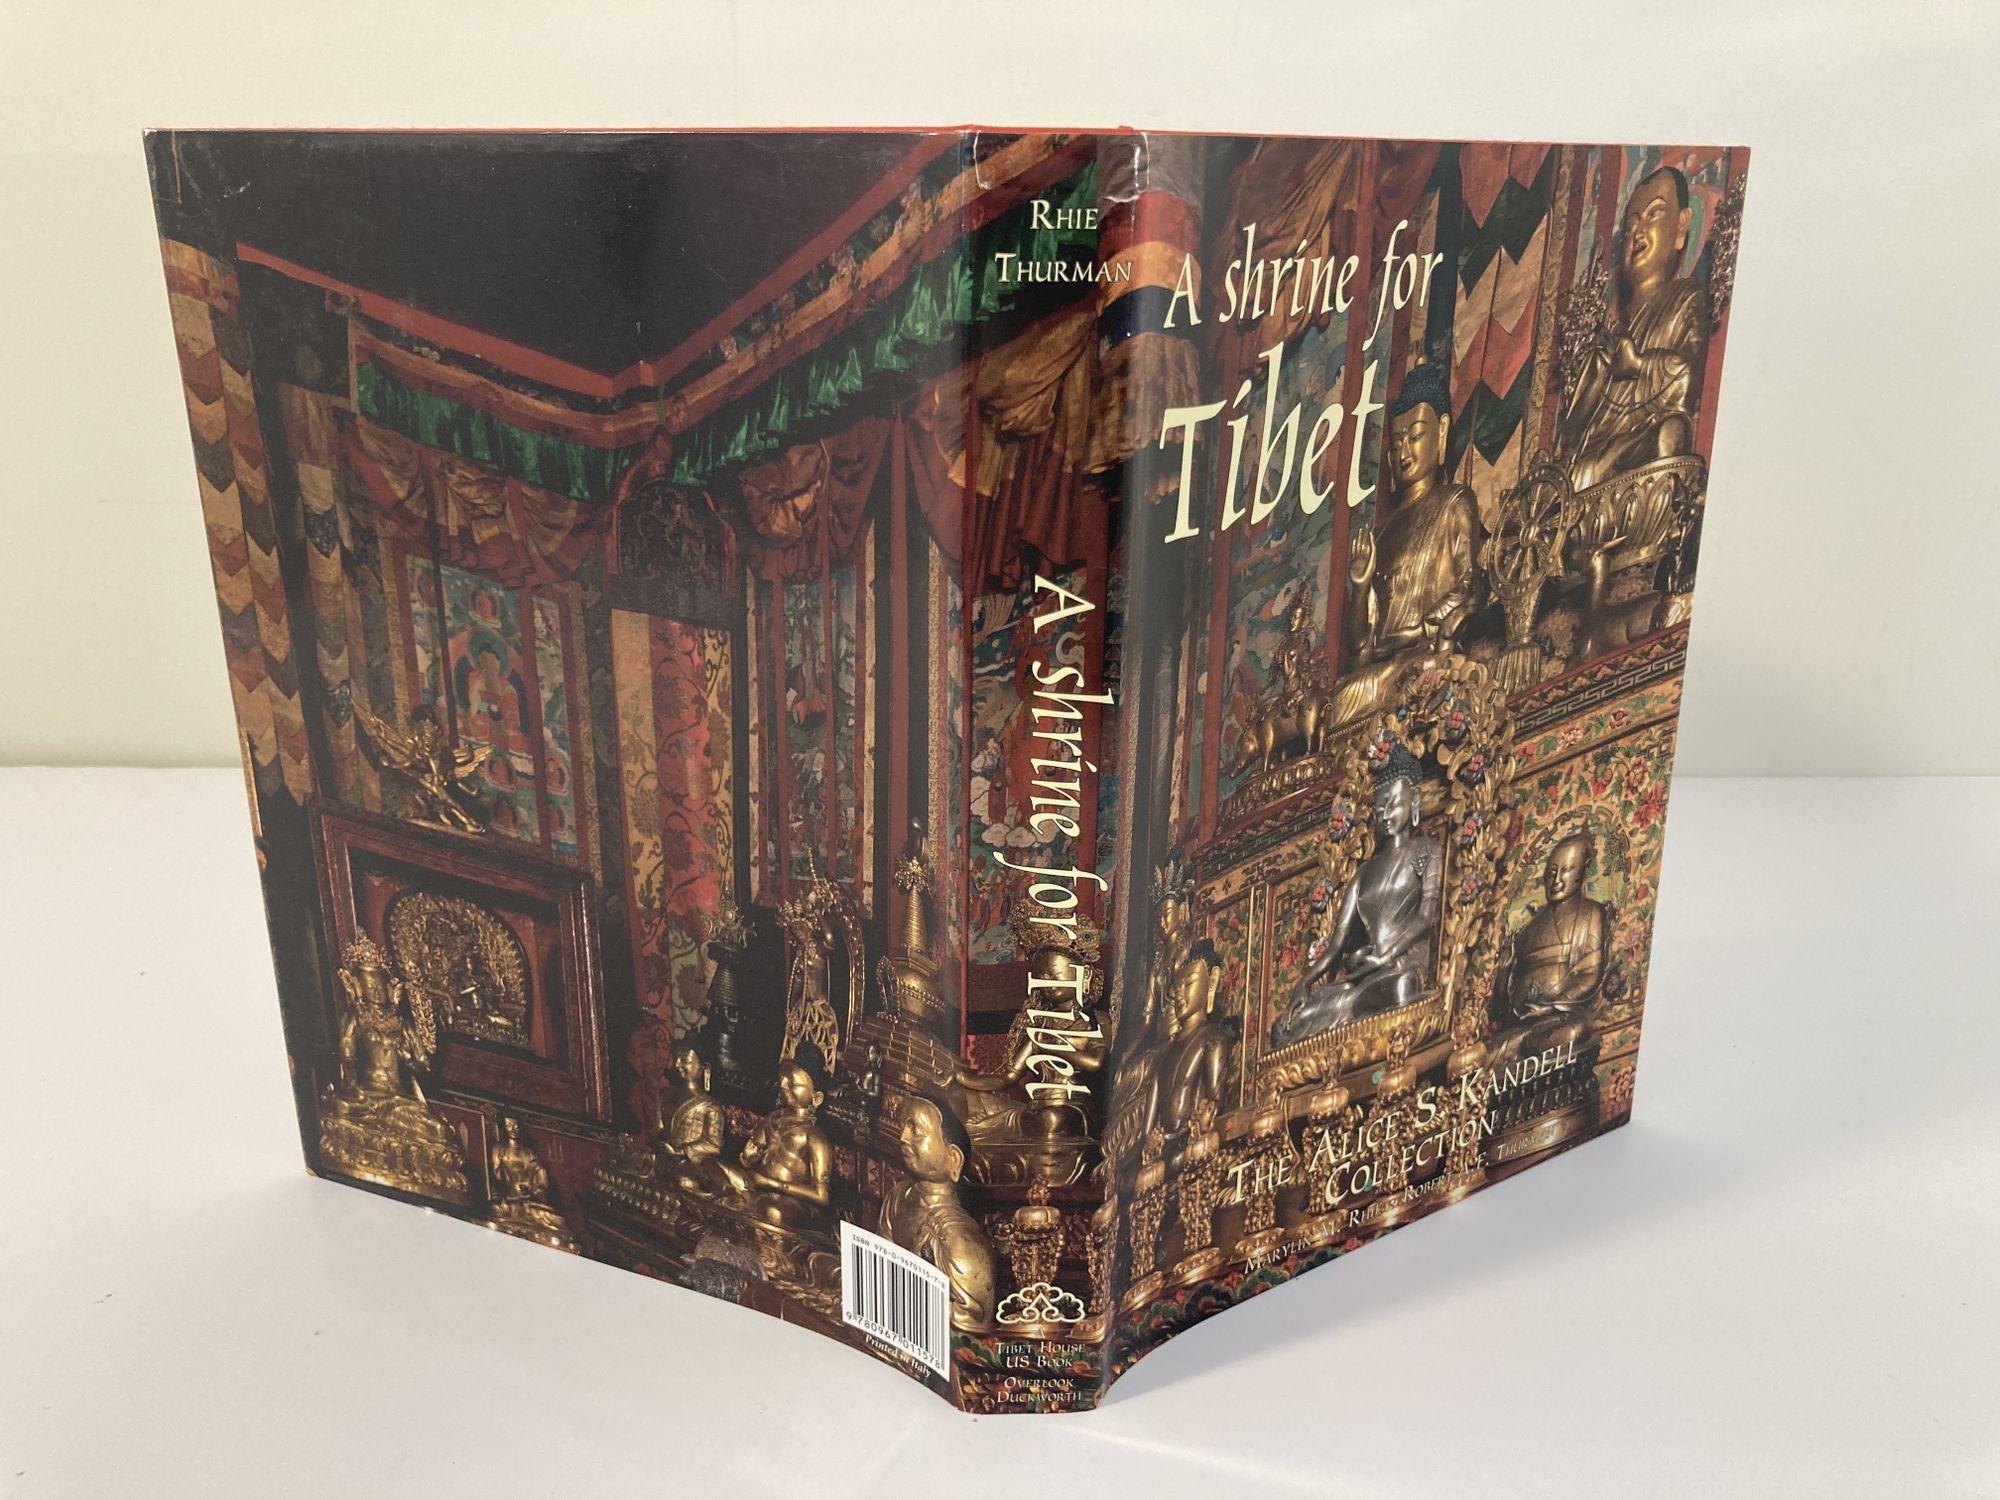 Tibetan Shrine for Tibet, The Alice S. Kandell Collection Hardcover Book For Sale